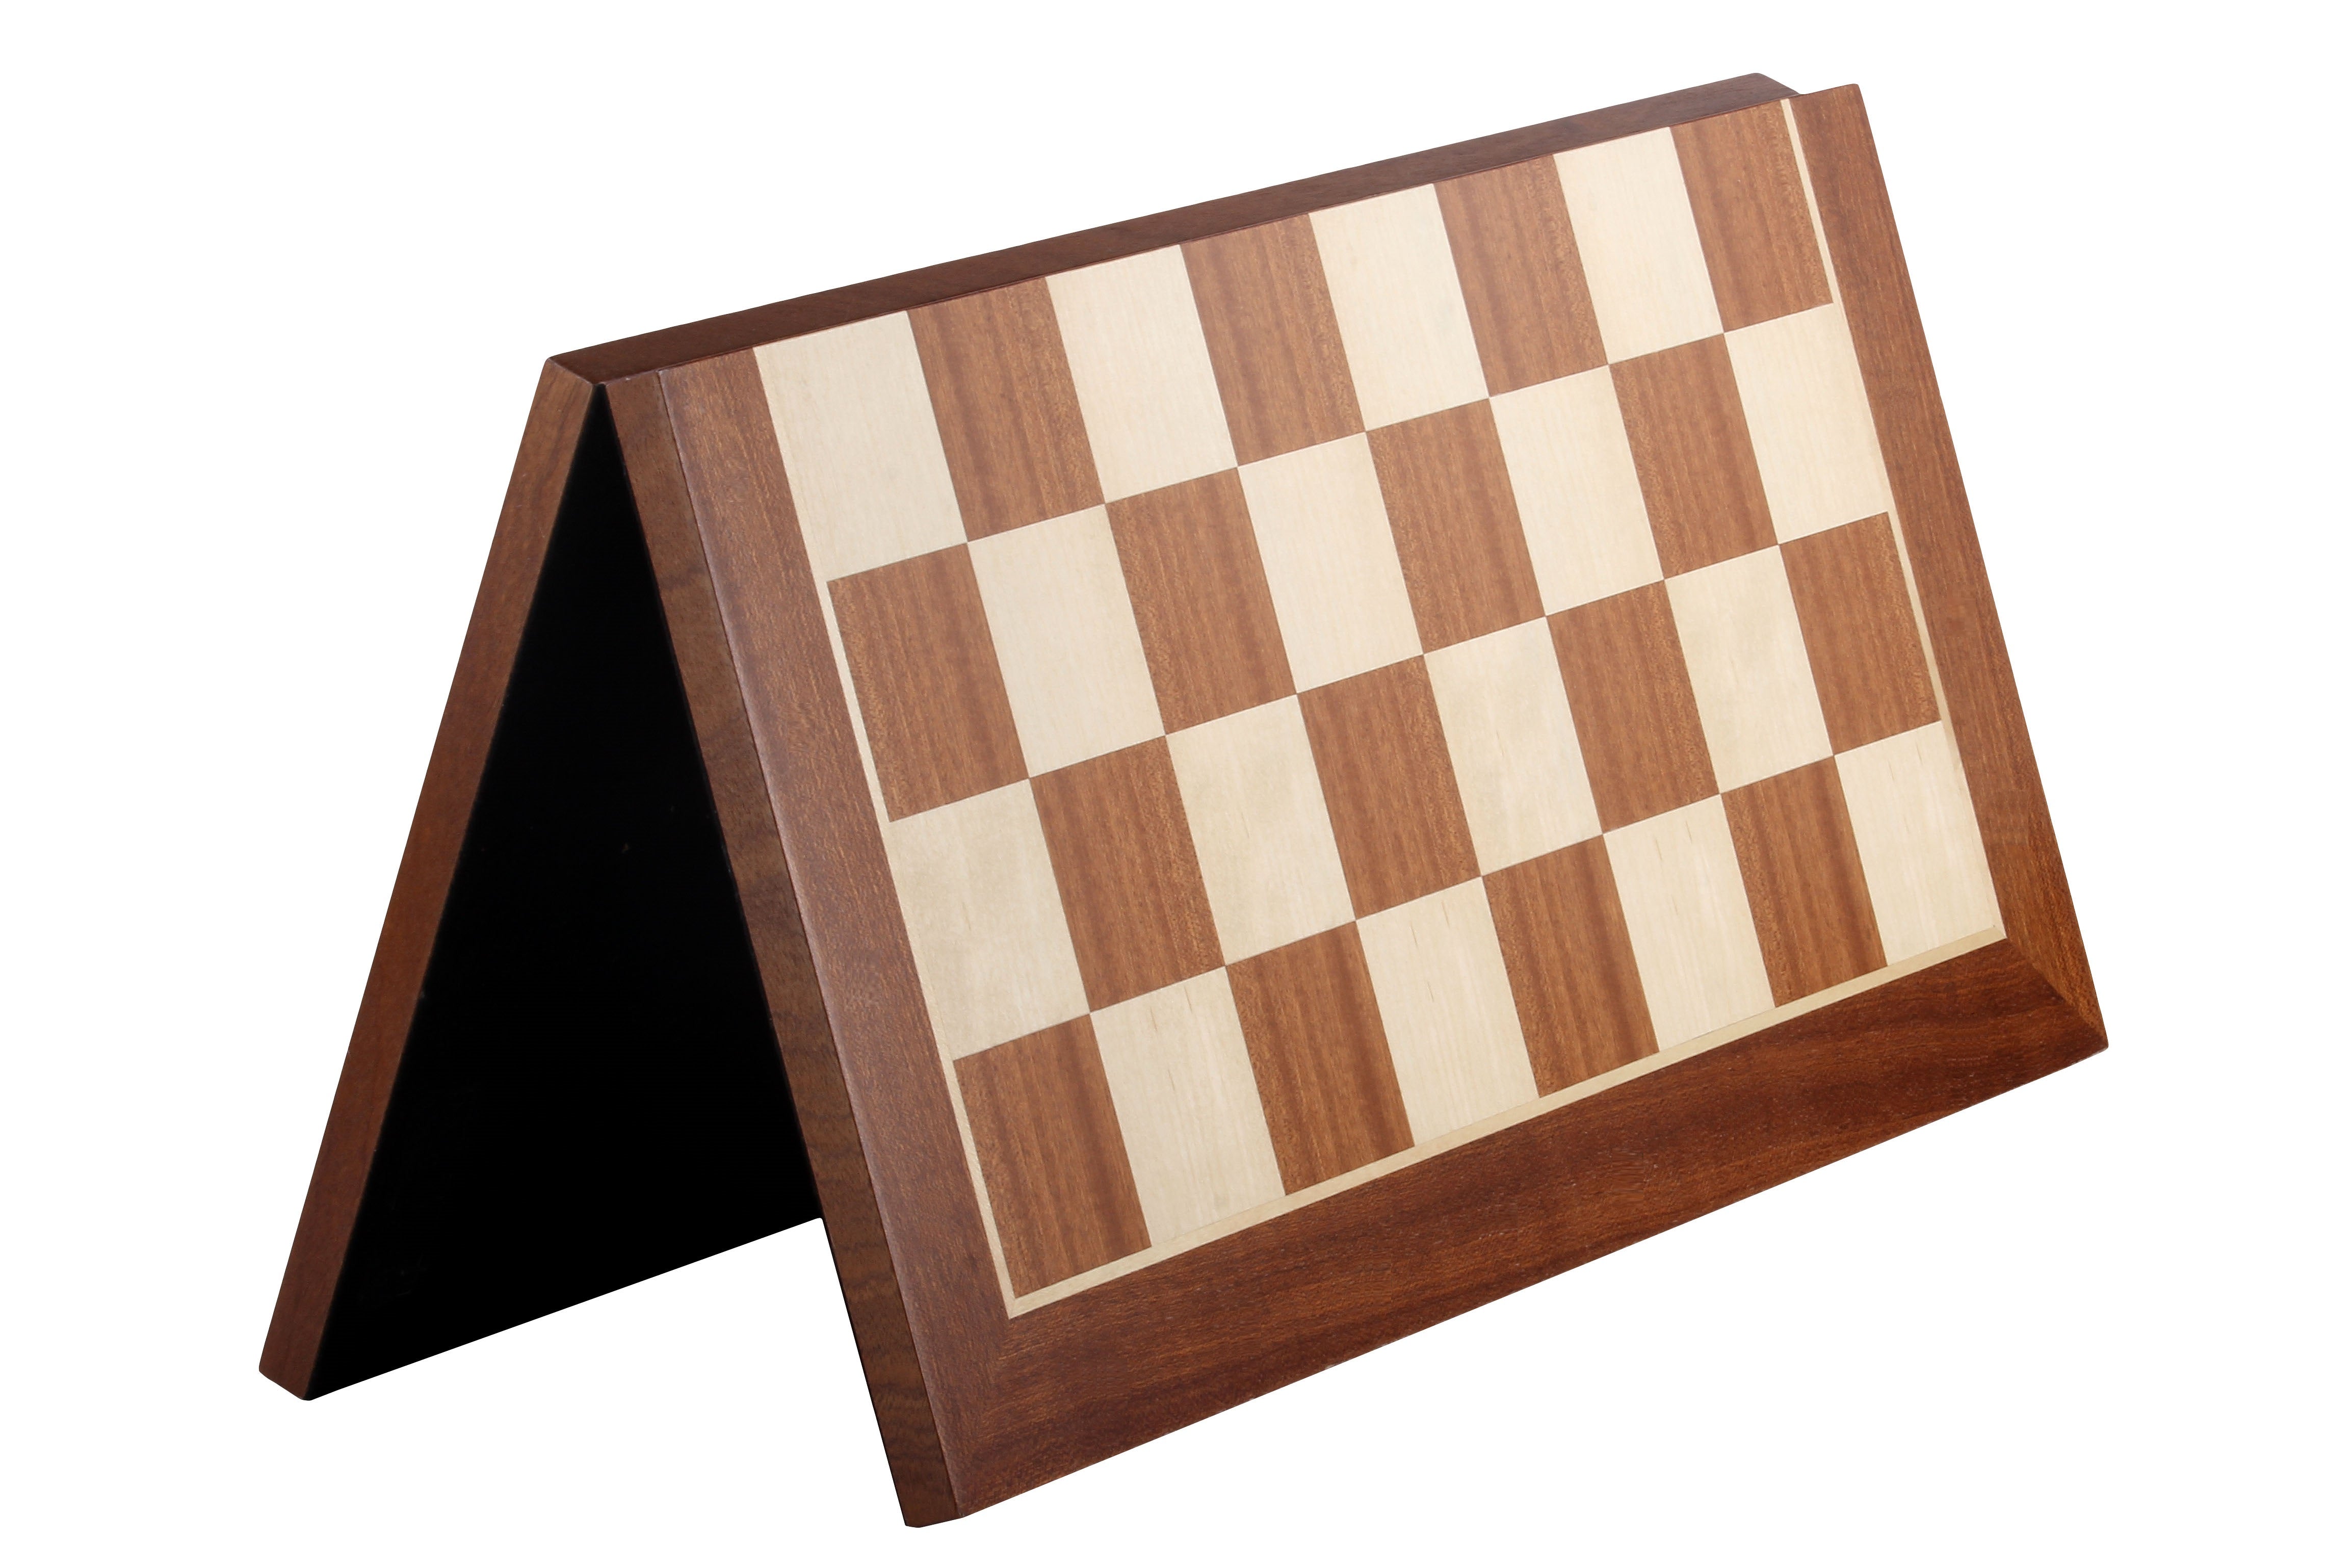 Tournament chessboard made of mahogany and beech maple, foldable, field size 58 mm